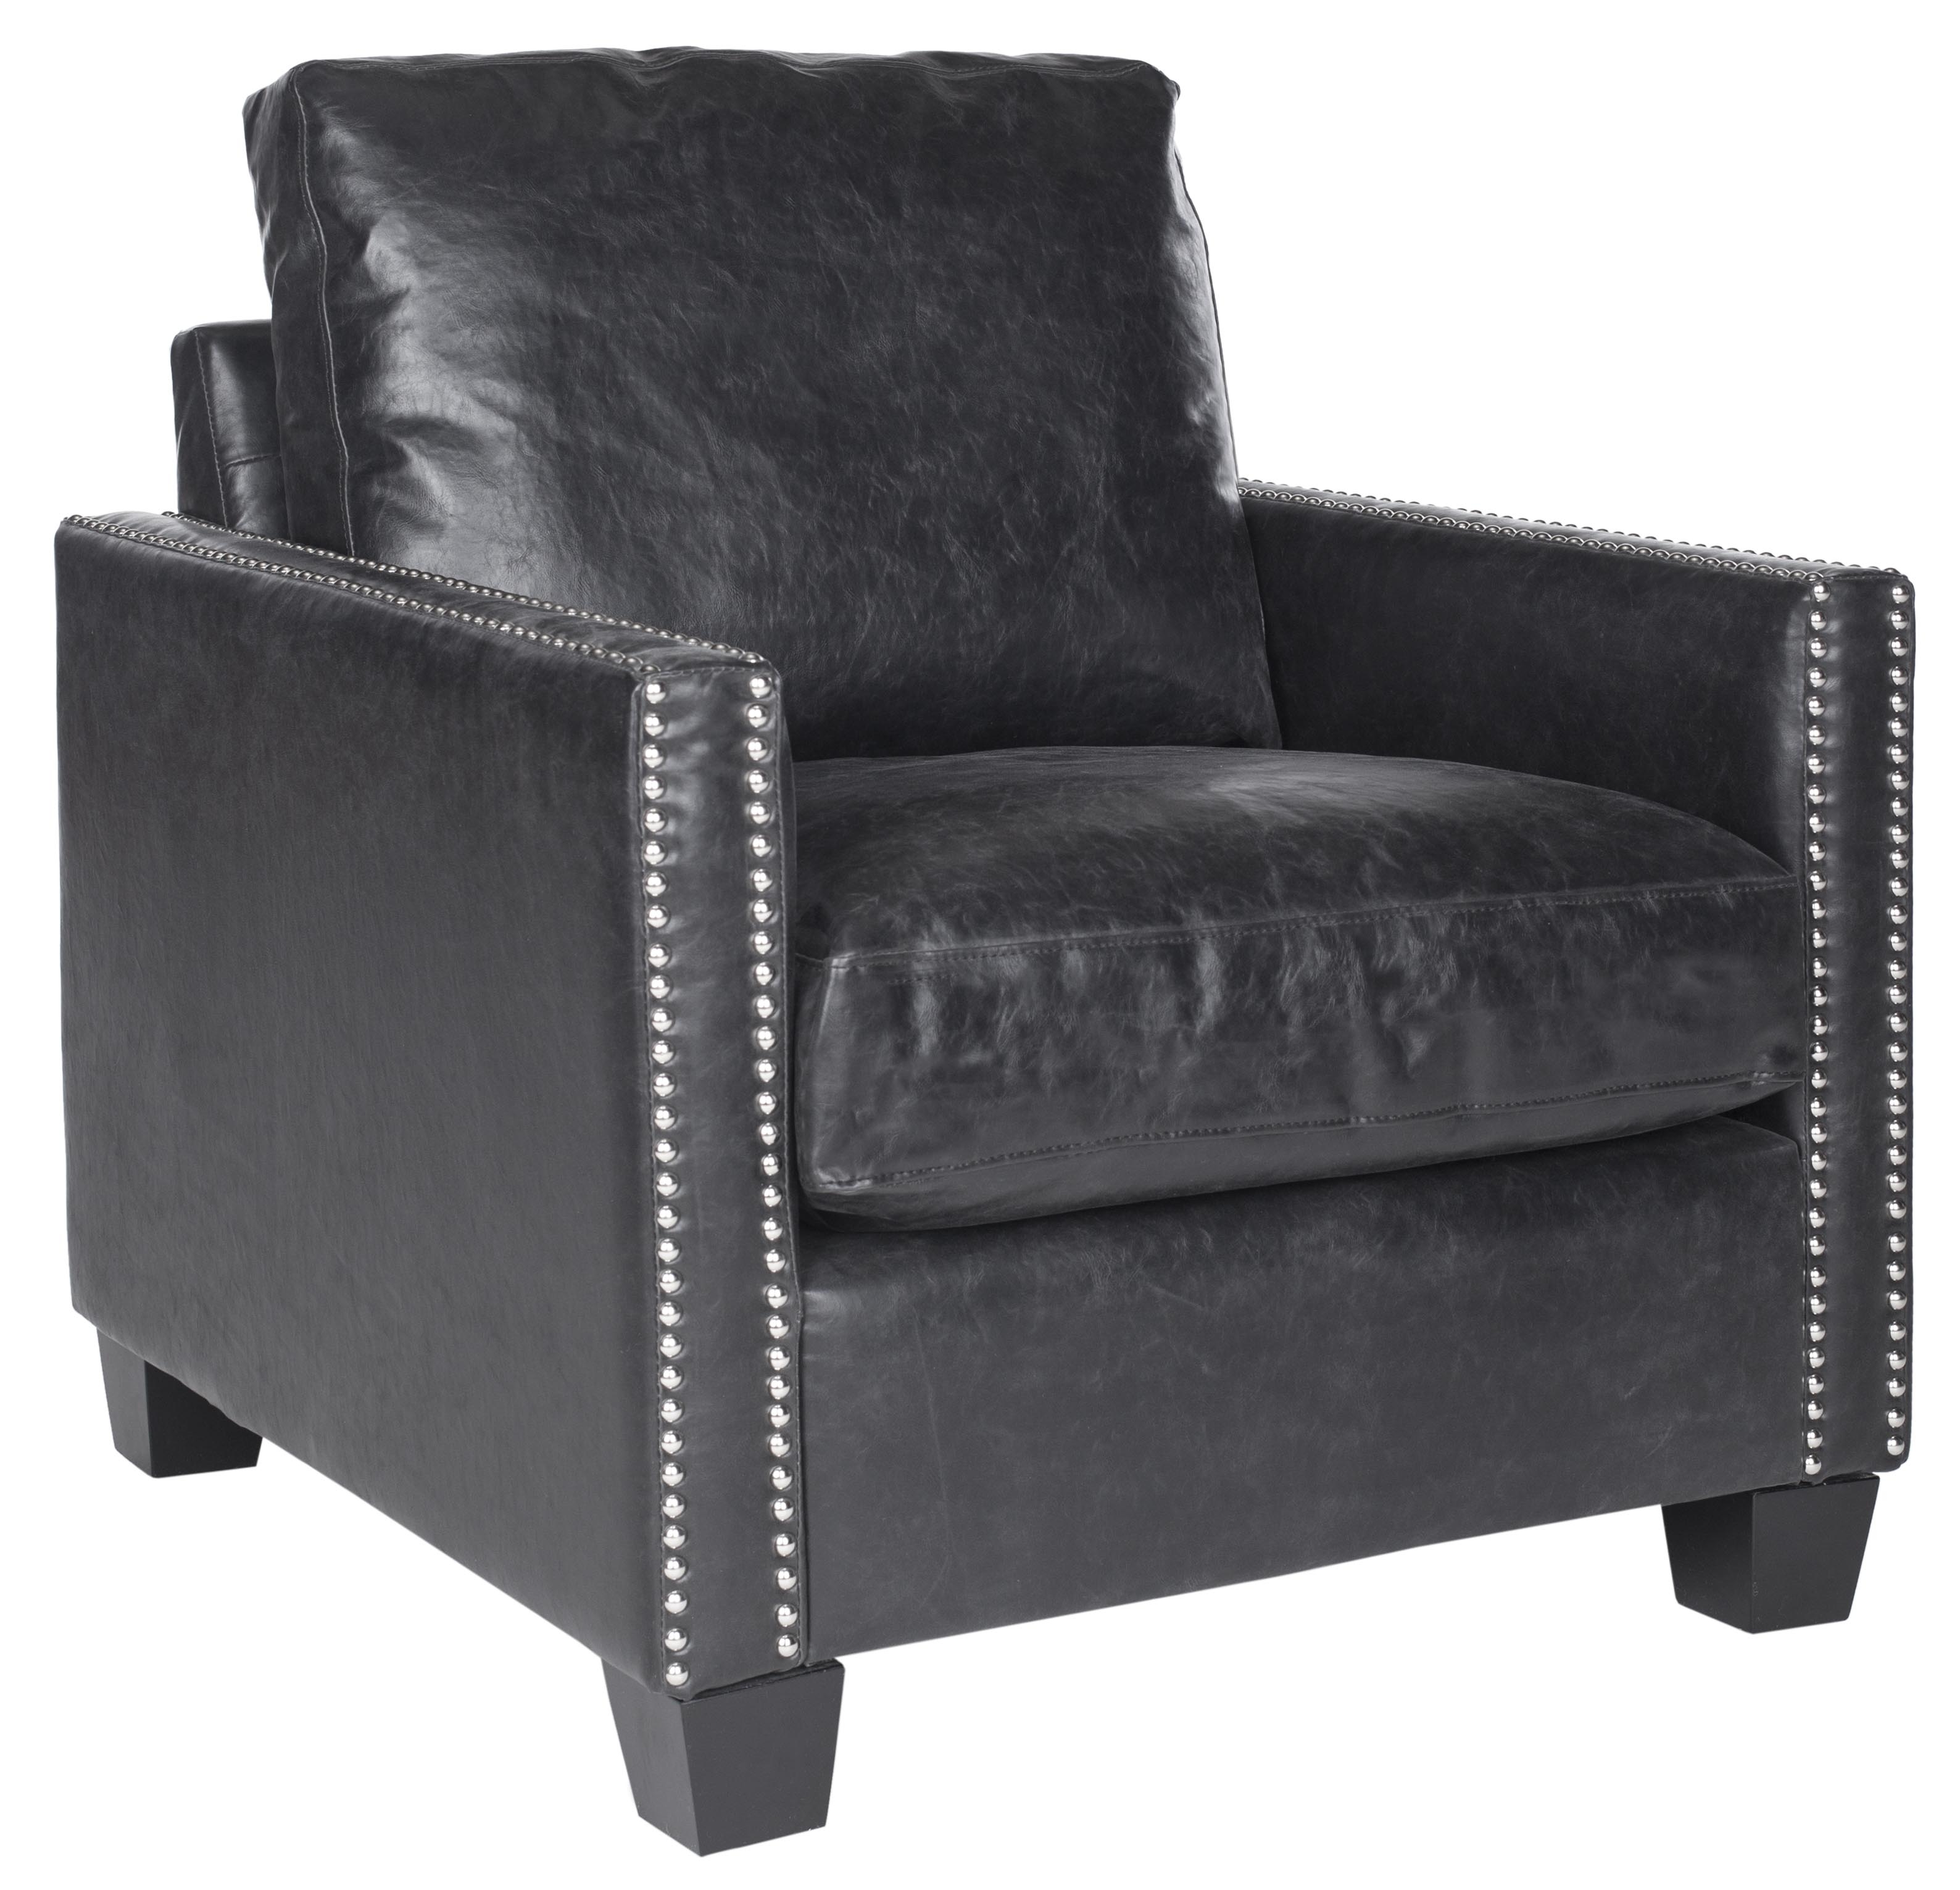 Horace Leather Club Chair - Silver Nail Heads - Antique Black/Black - Arlo Home - Image 1